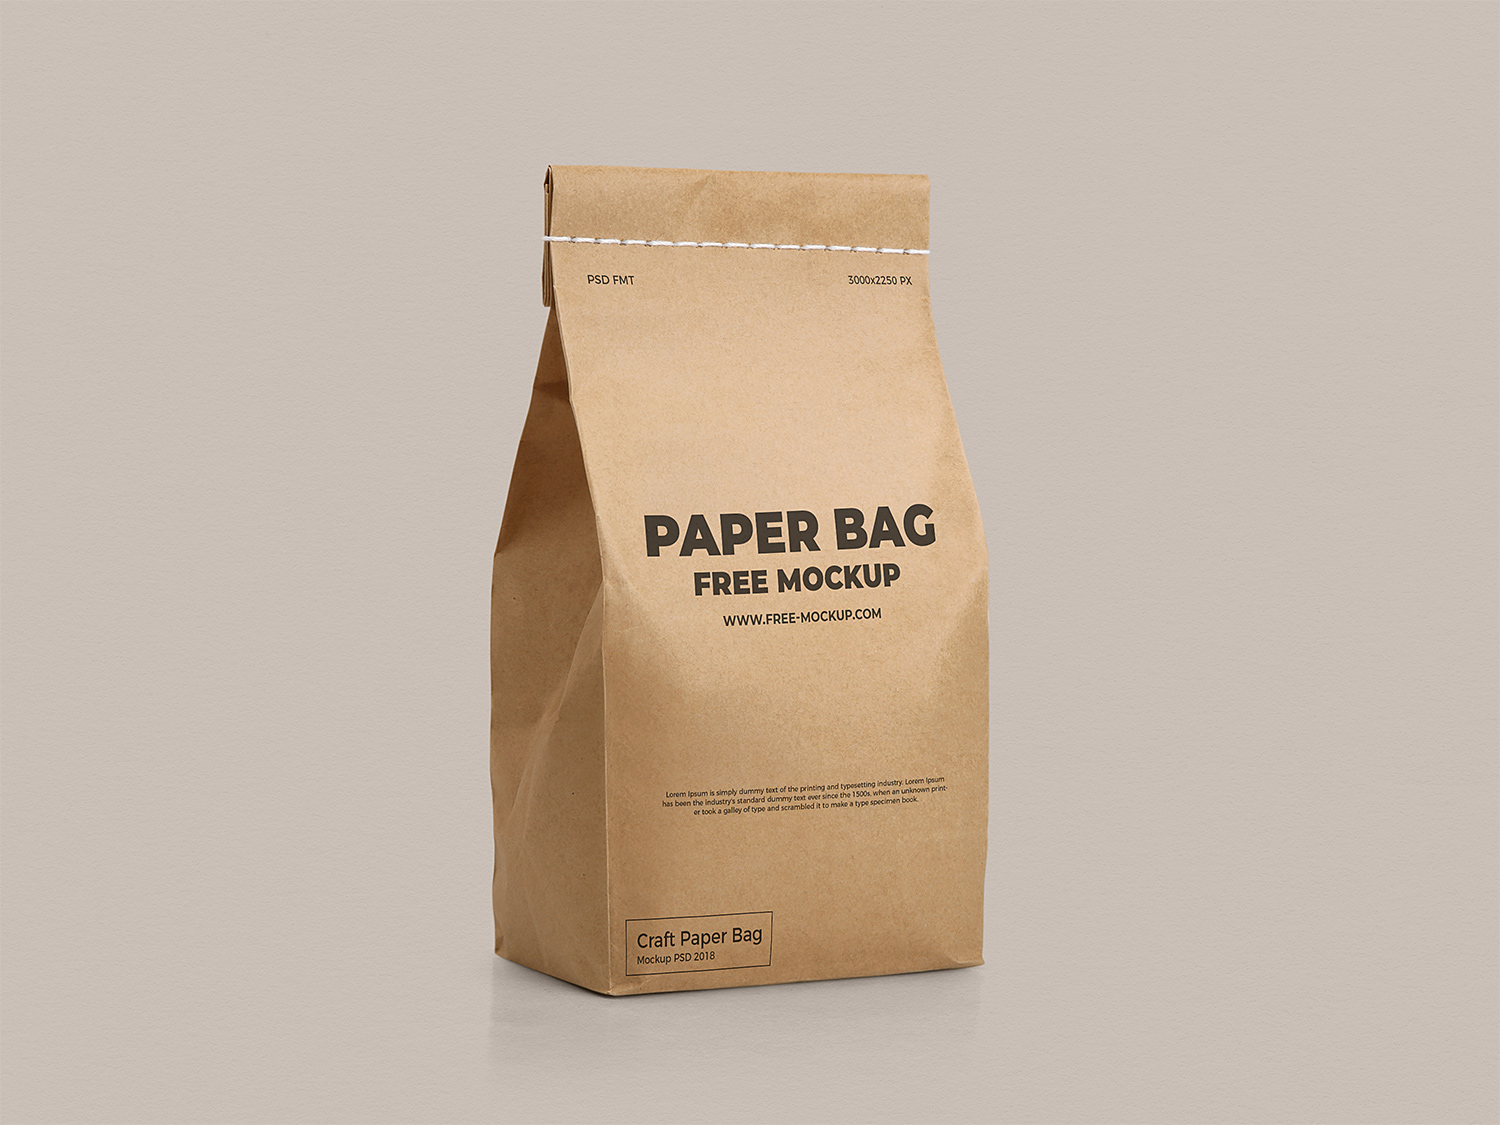 Large Chain Grocery store is charging for cheap paper bags!!! :  r/Anticonsumption